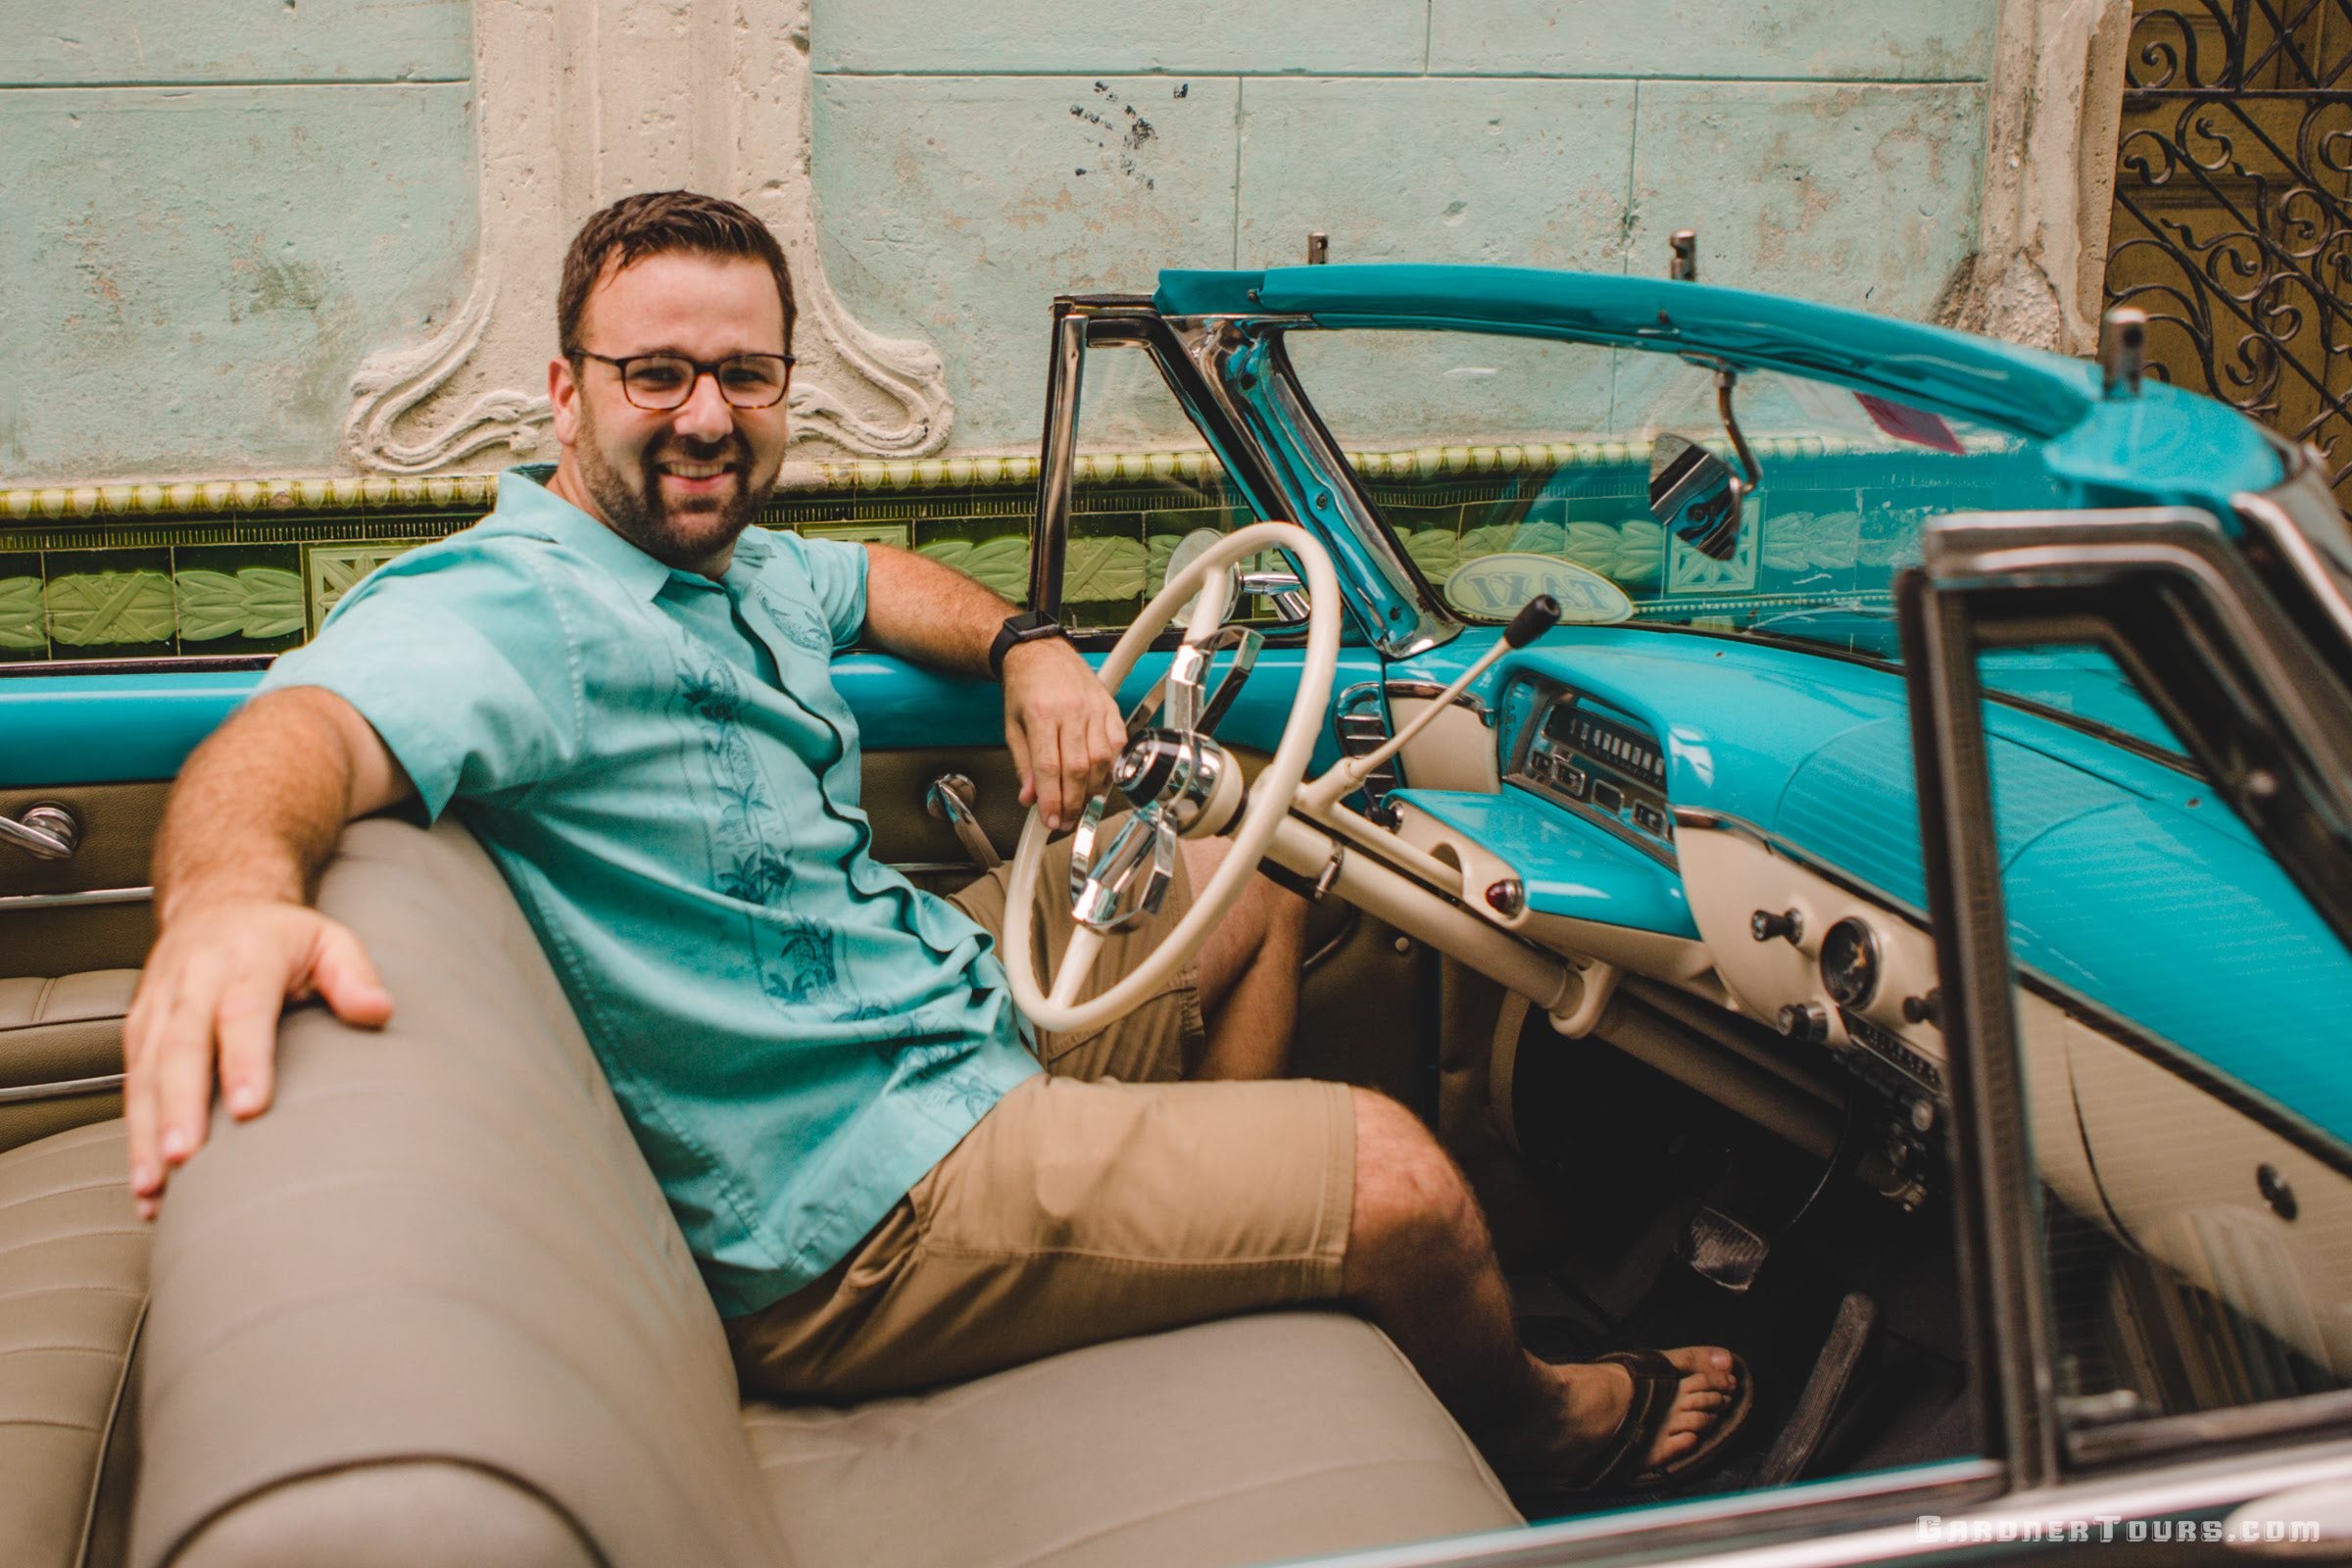 Gardner Tours Owner and Tour Guide Colby Gardner smiles as he sits behind the wheel of a matching 1954 Mercury classic car in the streets of Old Havana, Cuba